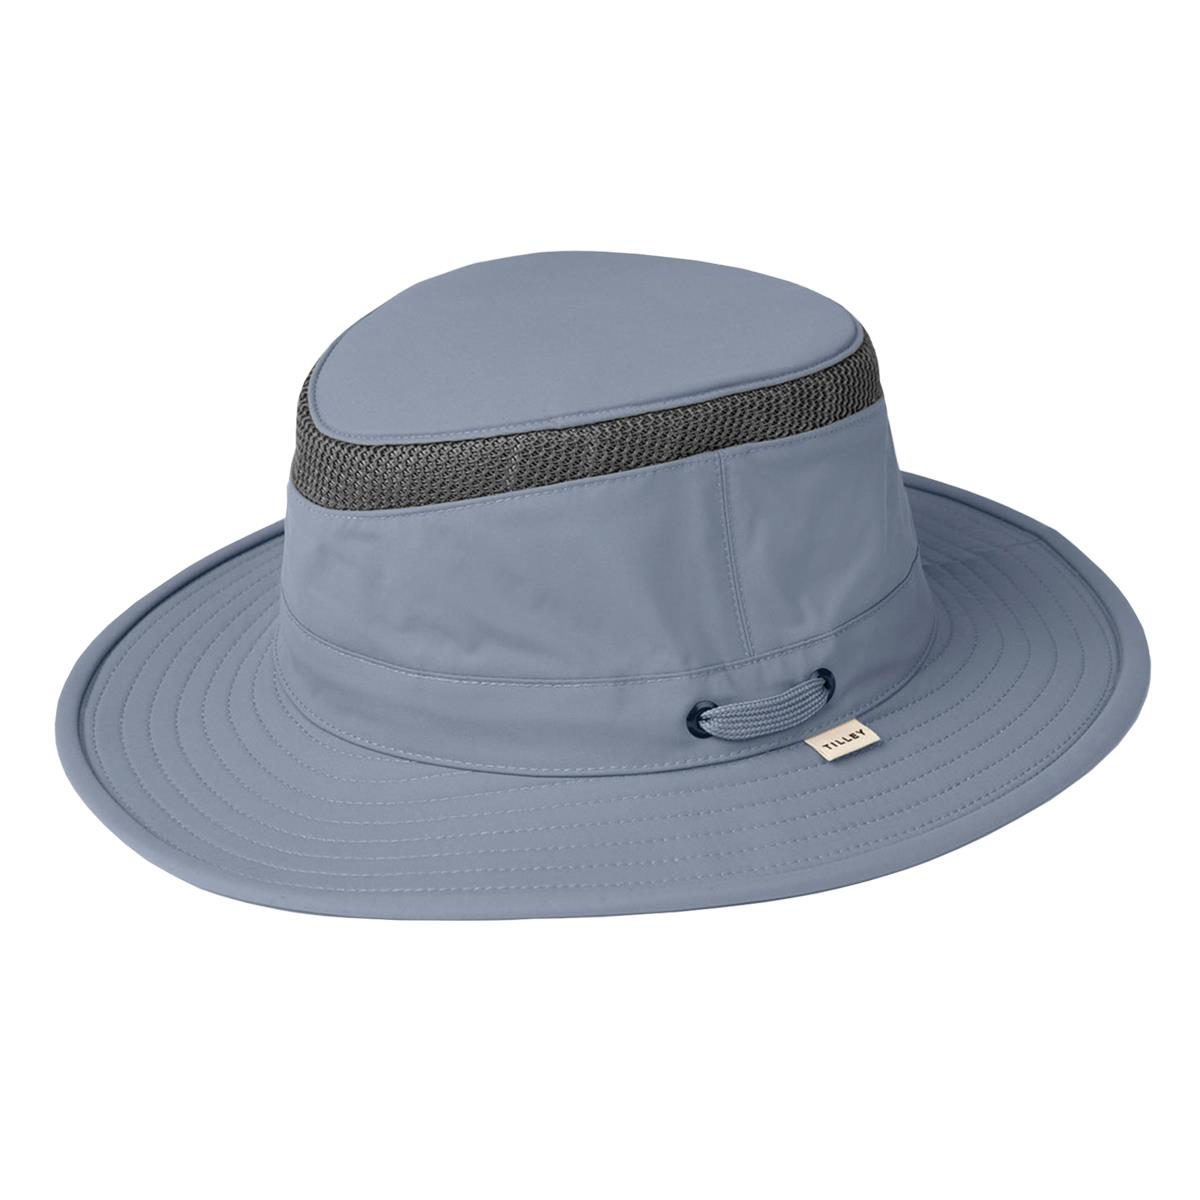 What exactly is the Tilley LTM5 hat and its features?